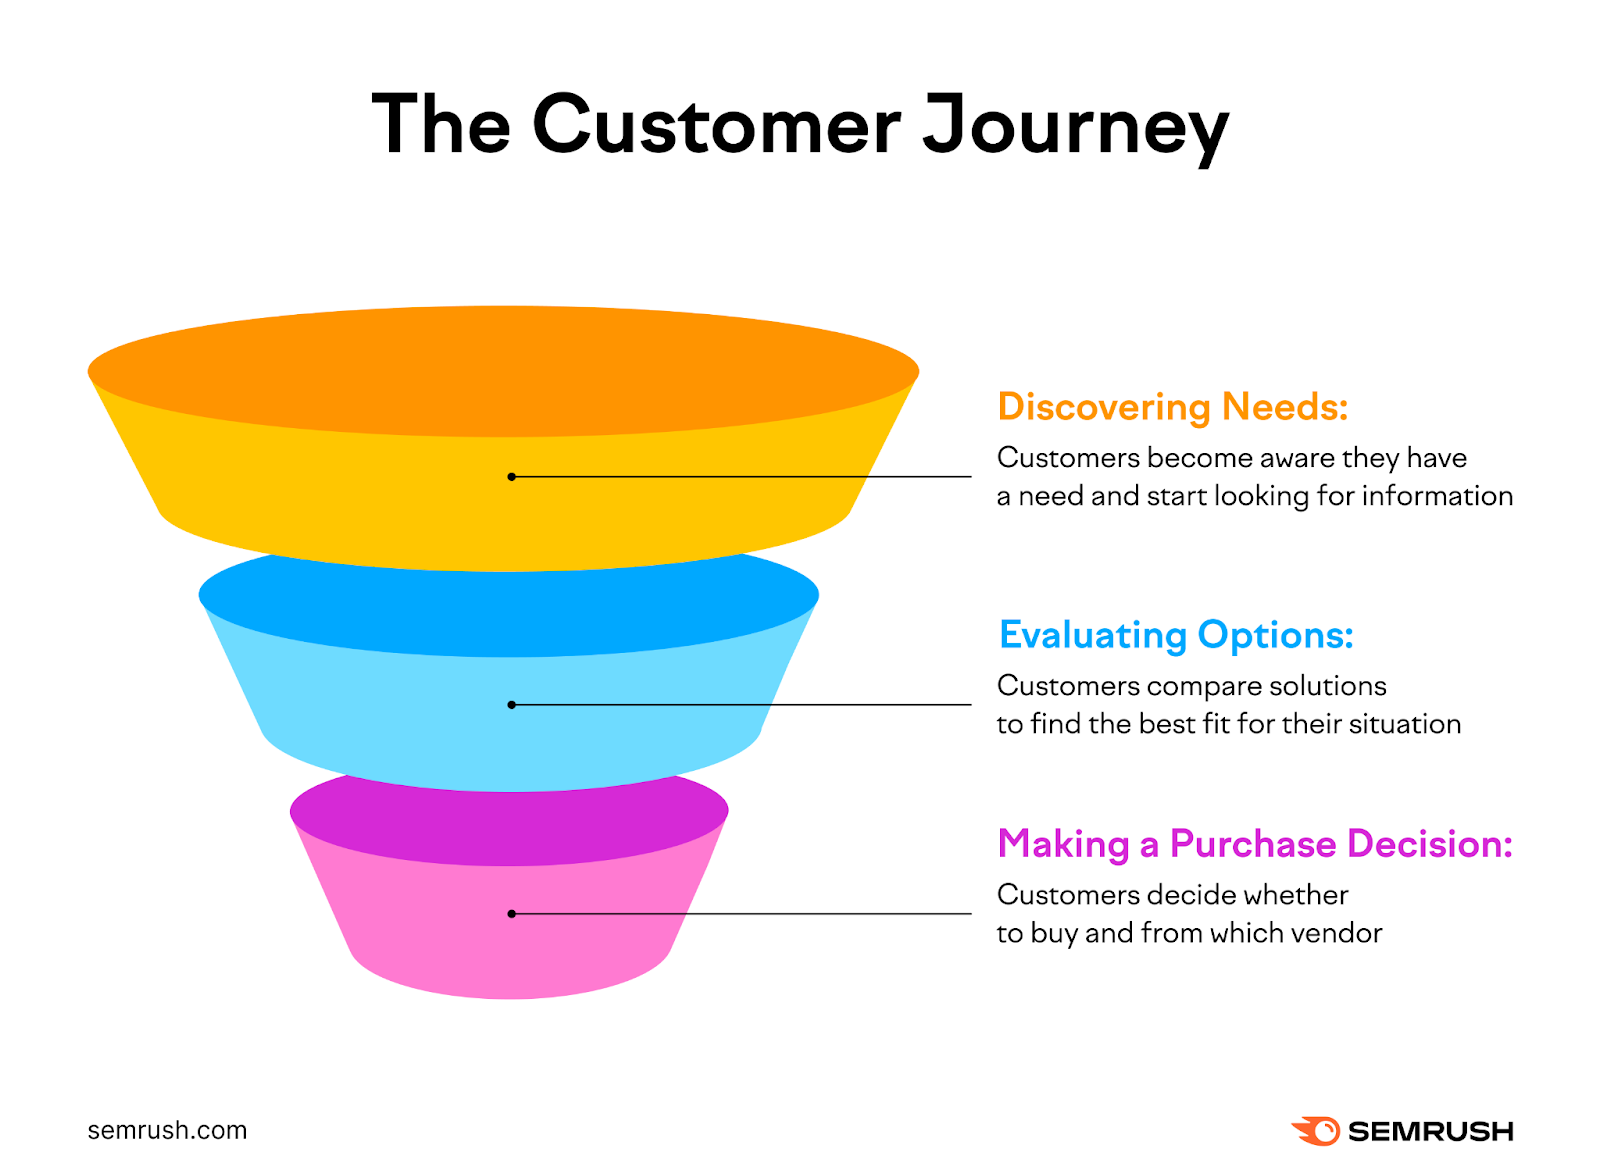 An funnel diagram depicting the customer purchase journey from discovering needs to evaluating options to making a decision.